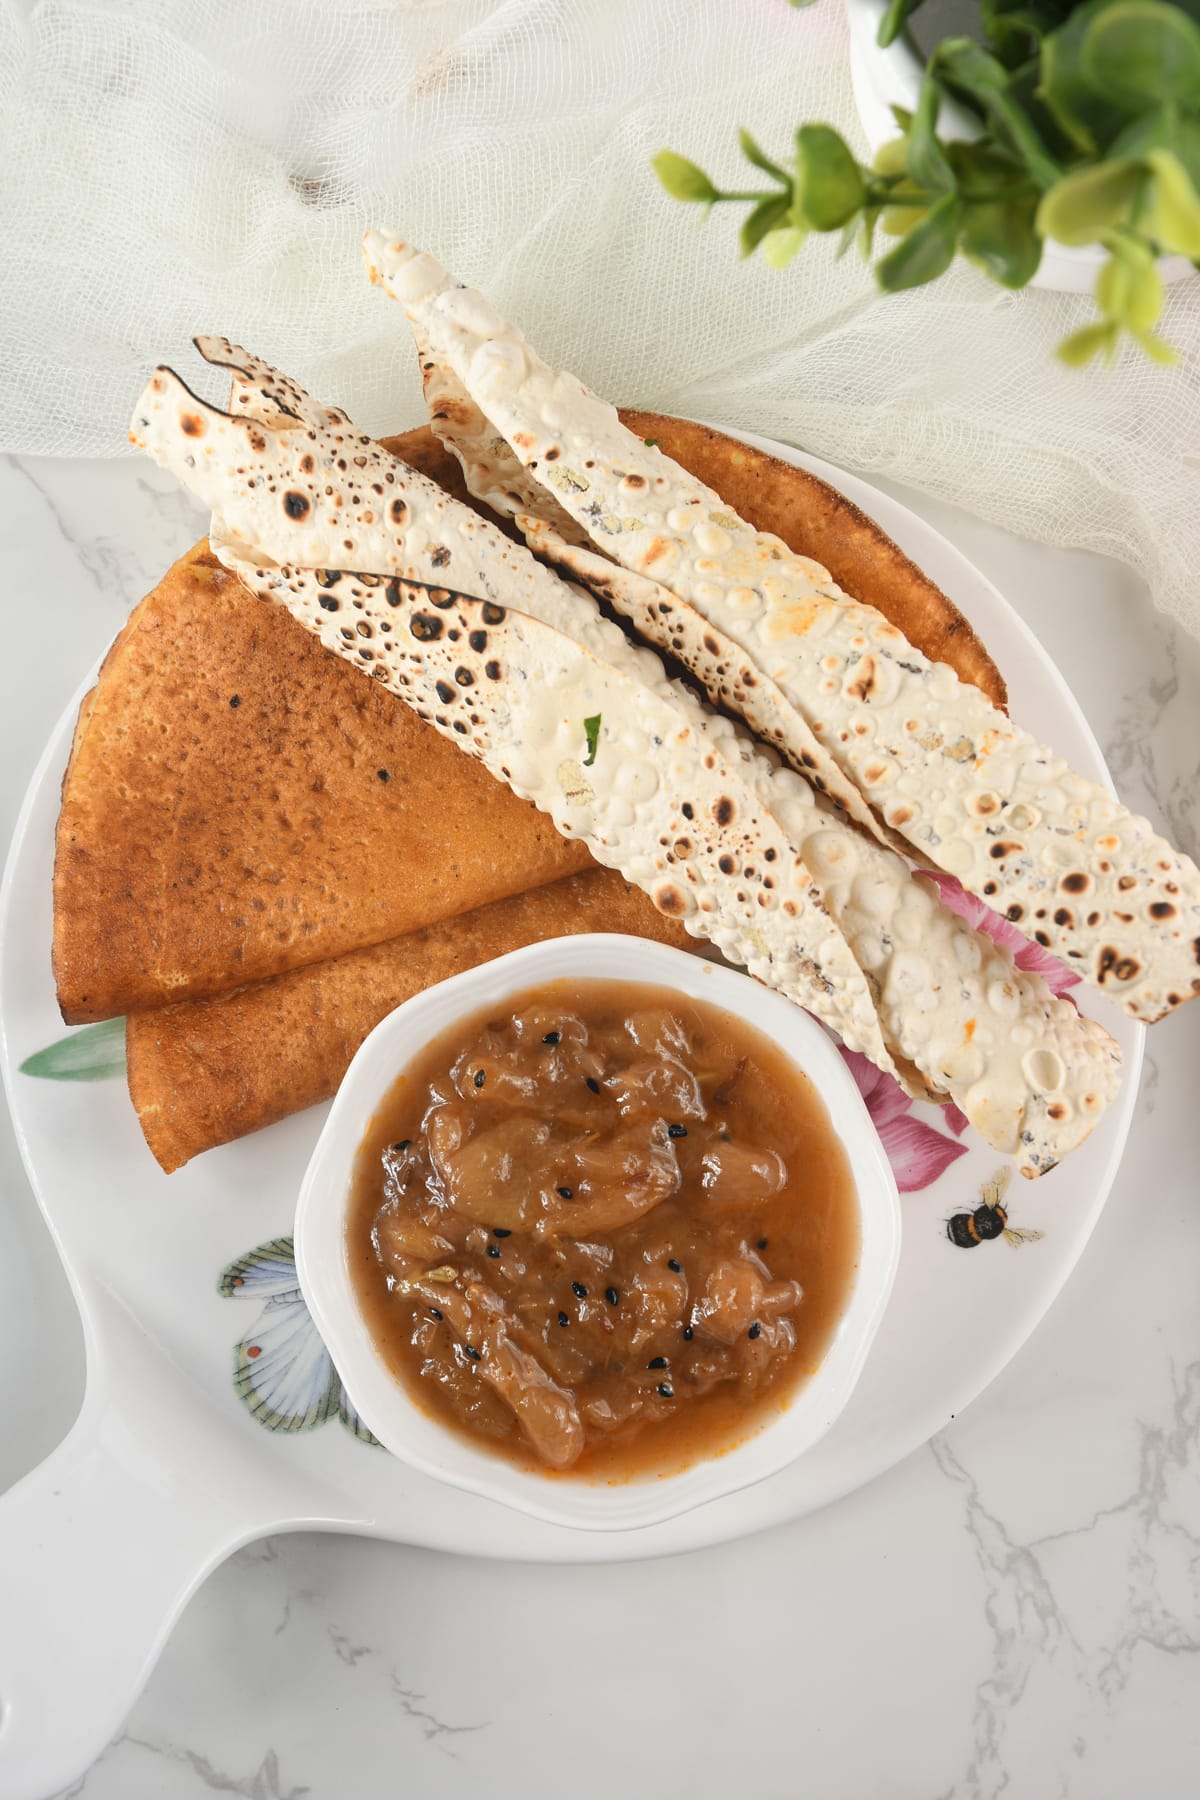 Grapes chutney served with flat bread made of lentils.